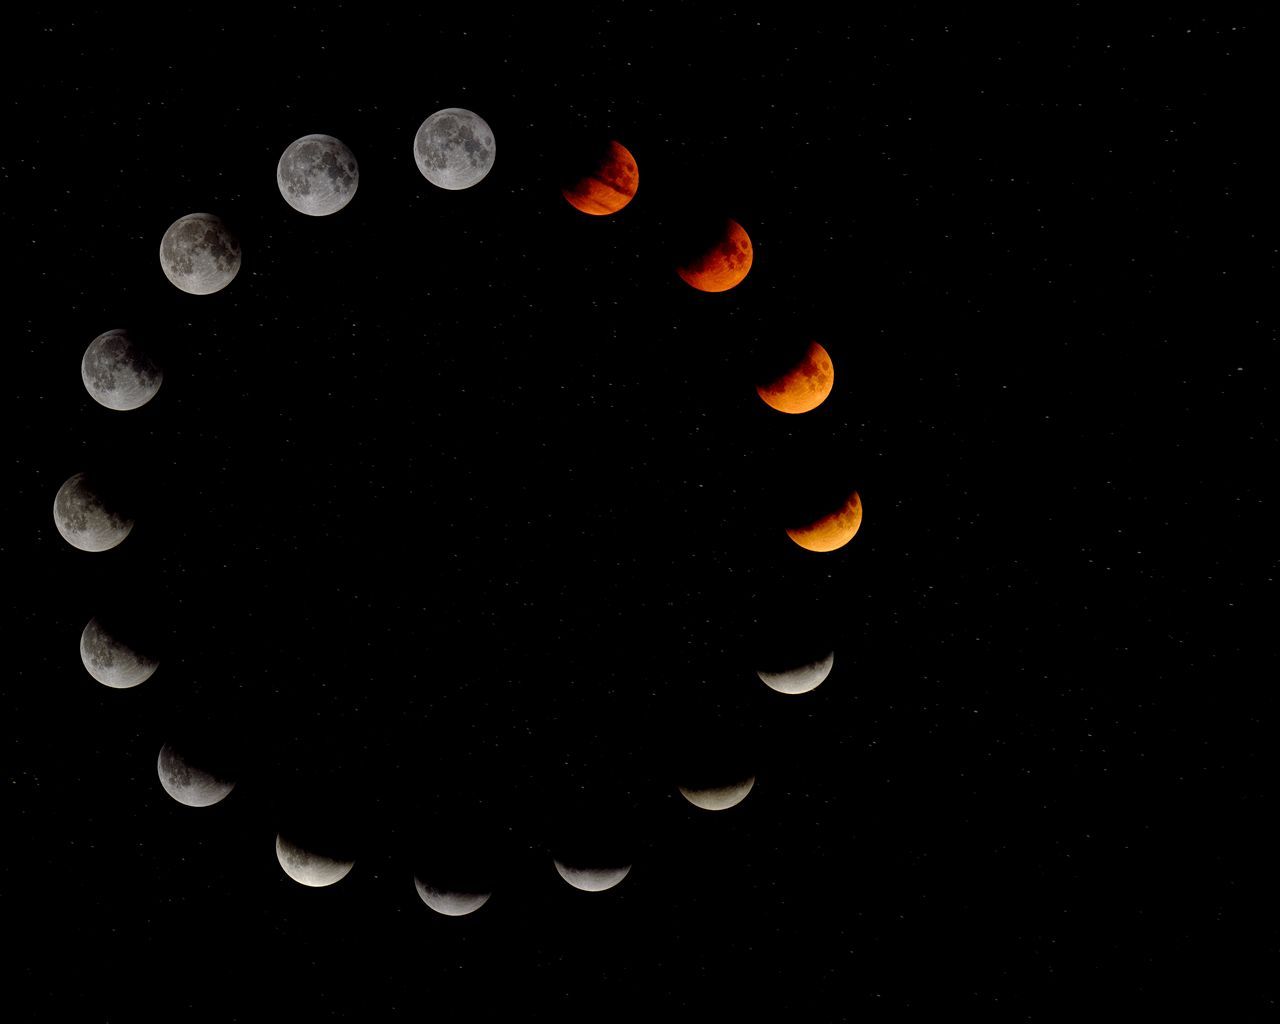 The moon phases are shown from new moon to full moon - Moon phases